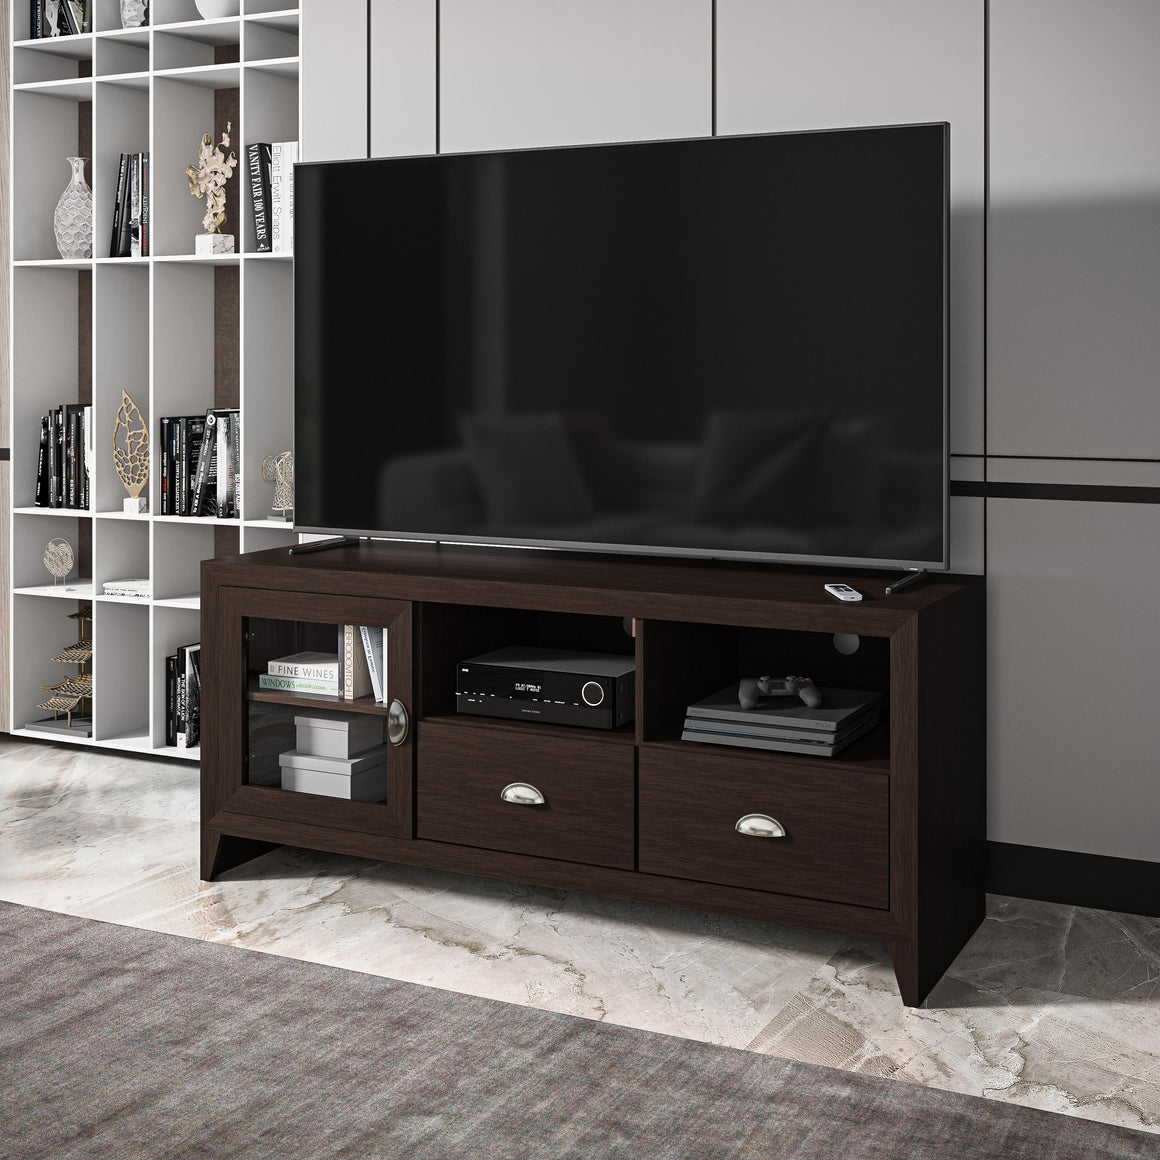 Modern TV Stand with Storage for TVs Up To 60"